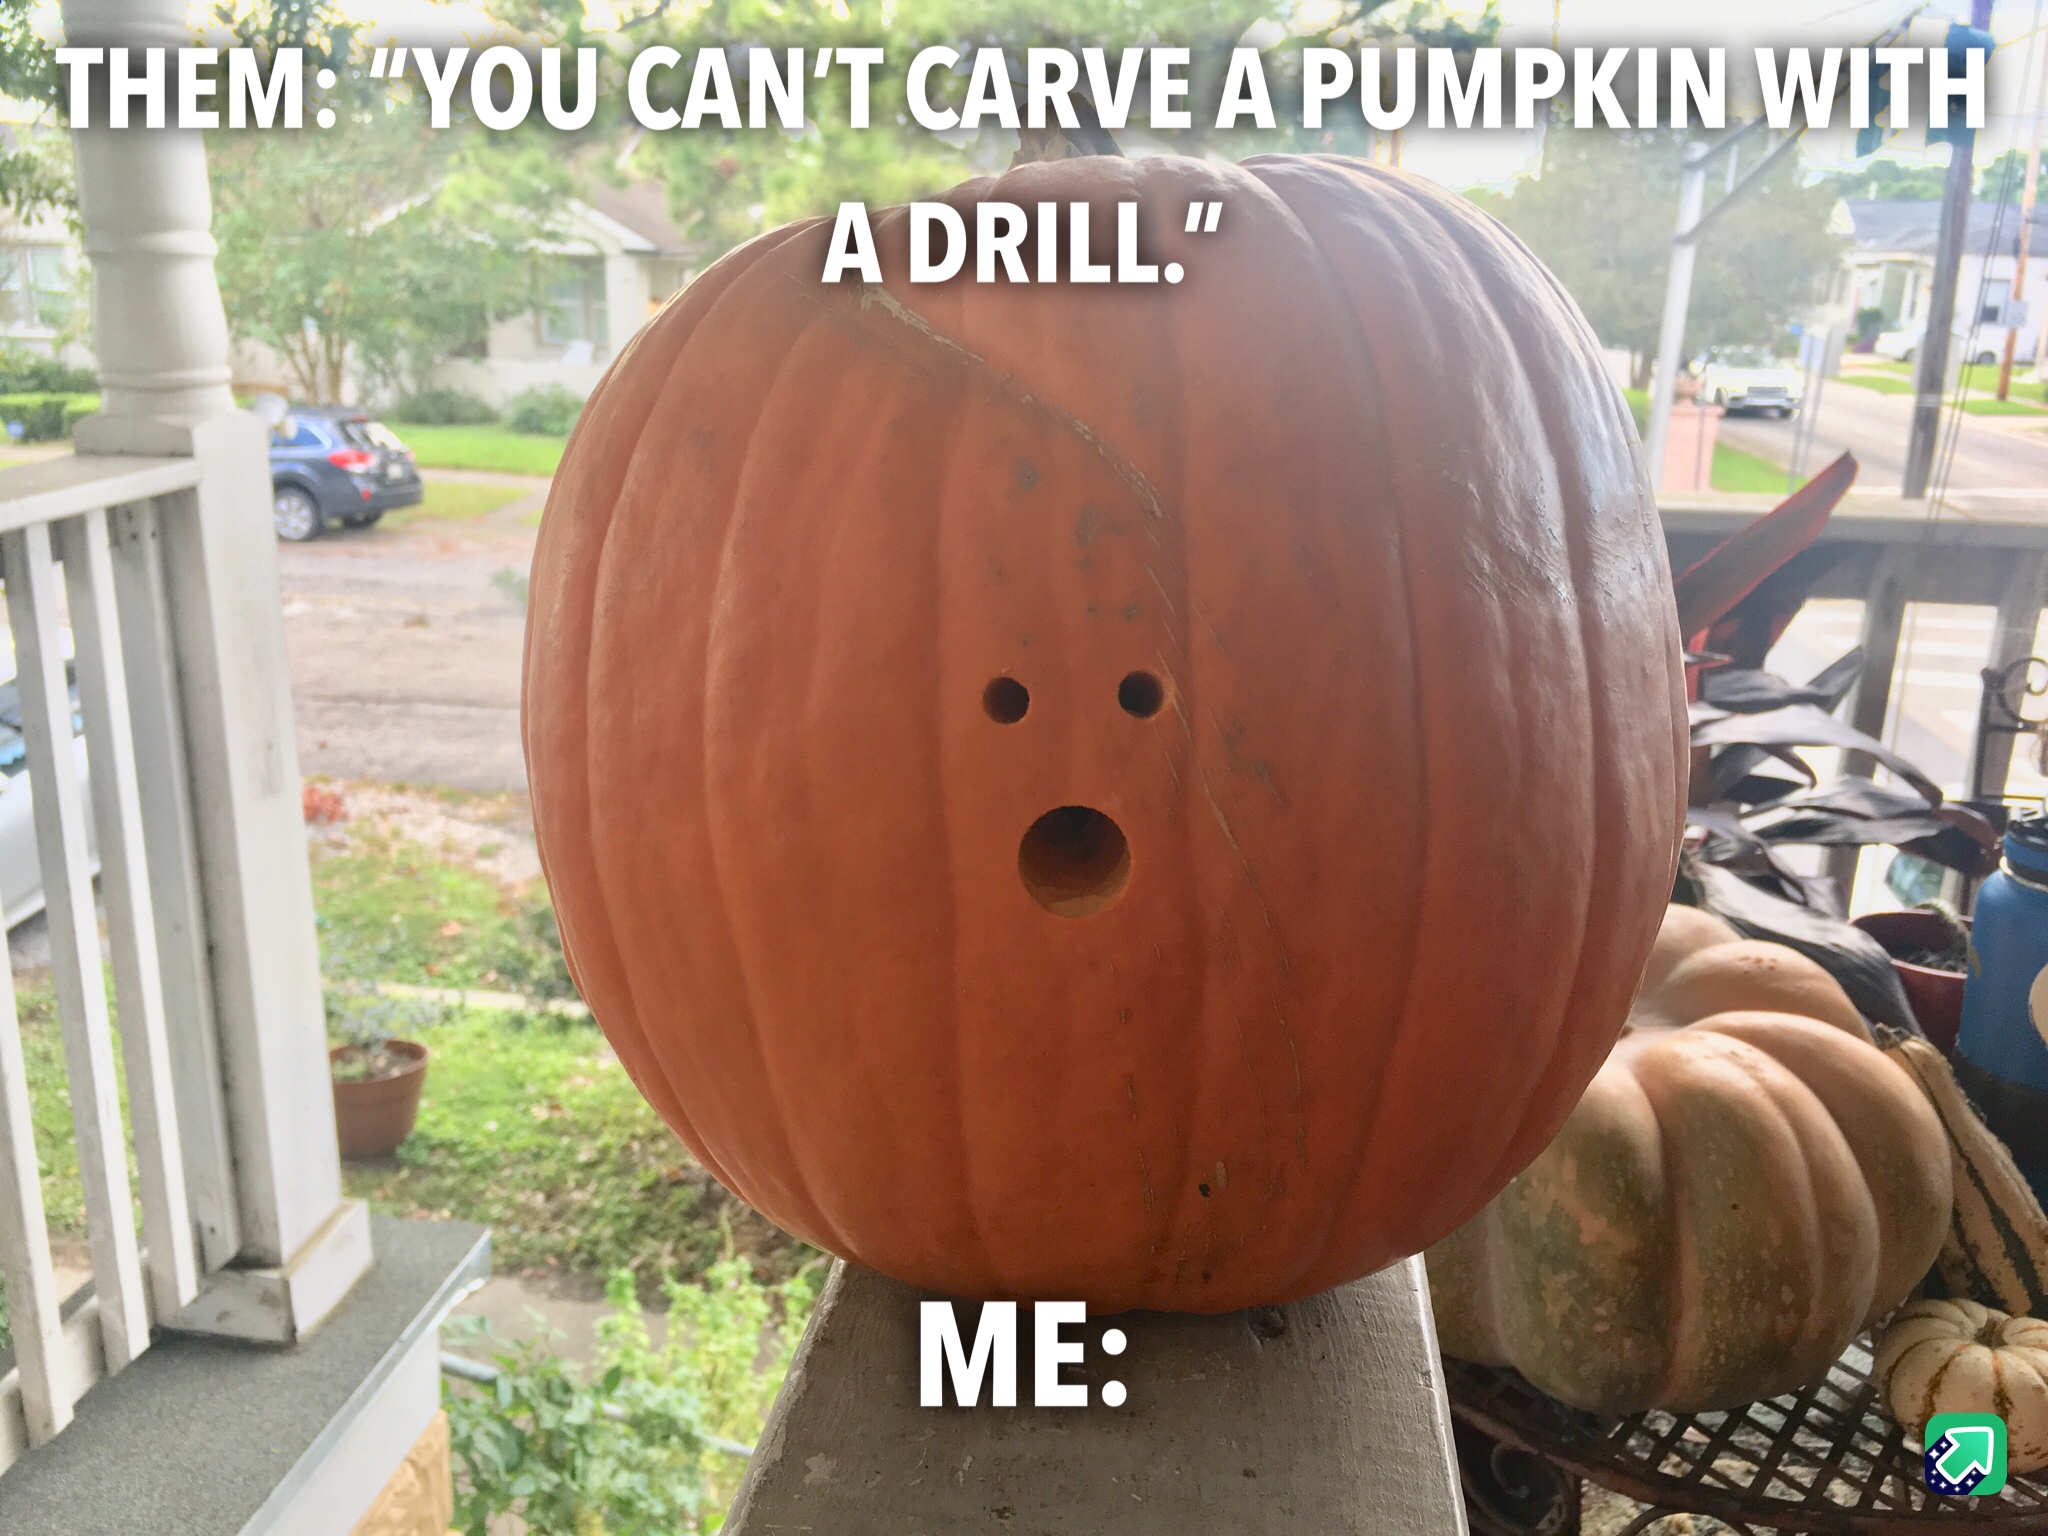 pumpkin - Them "You Can'T Carve A Pumpkin With A Drill." Me